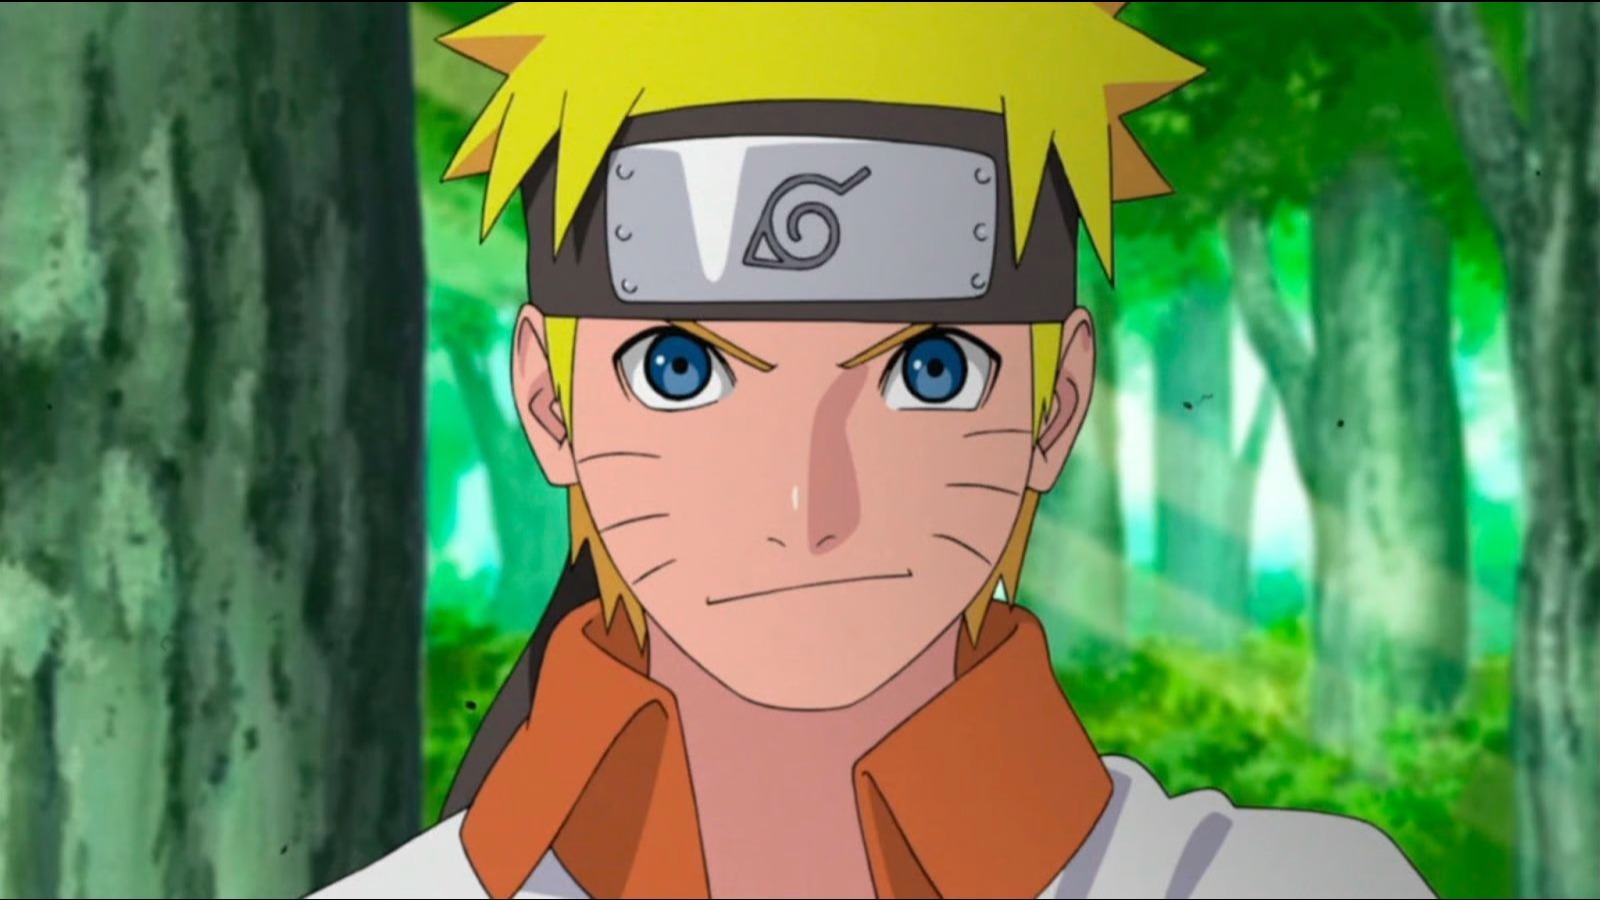 The Naruto series will continue with Naruto's son (Warning: MAJOR